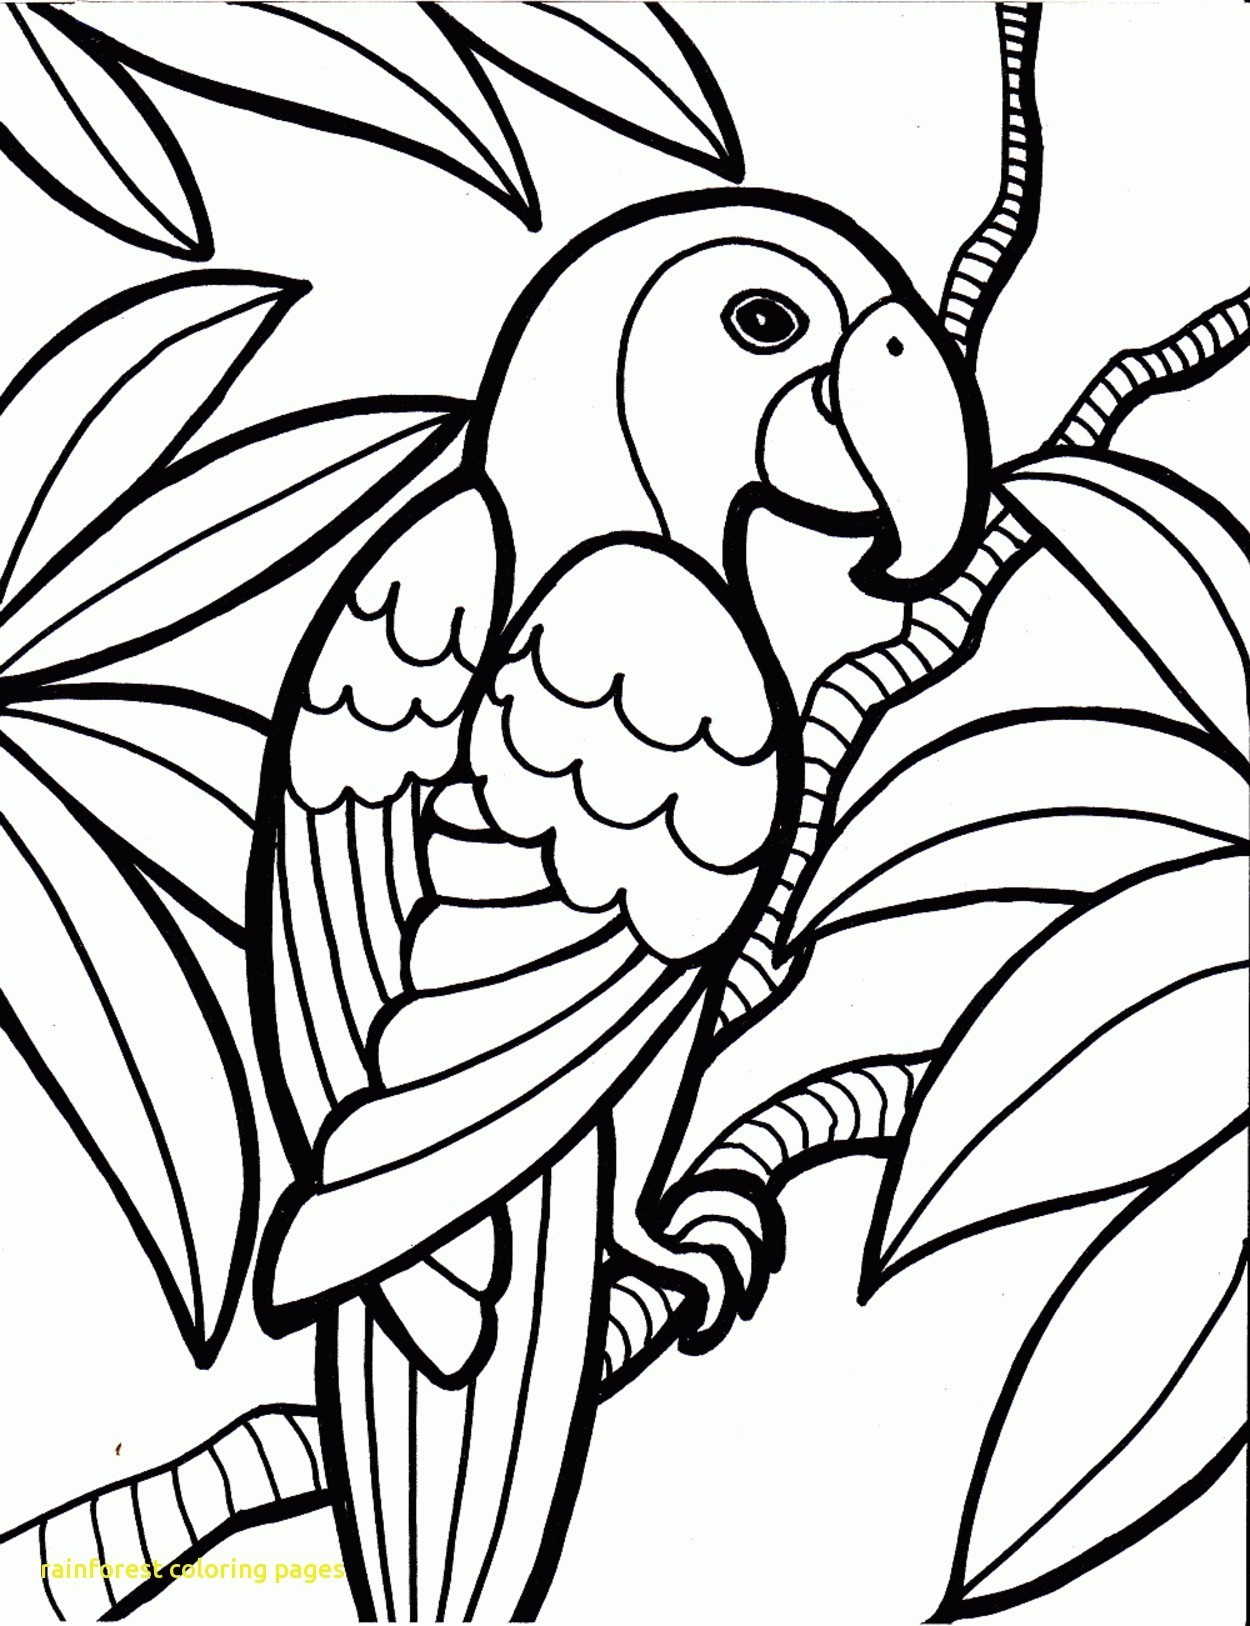 Animals In The Rainforest Coloring Pages New Rainforest Colouring Pages To Print Theyesyesyalls